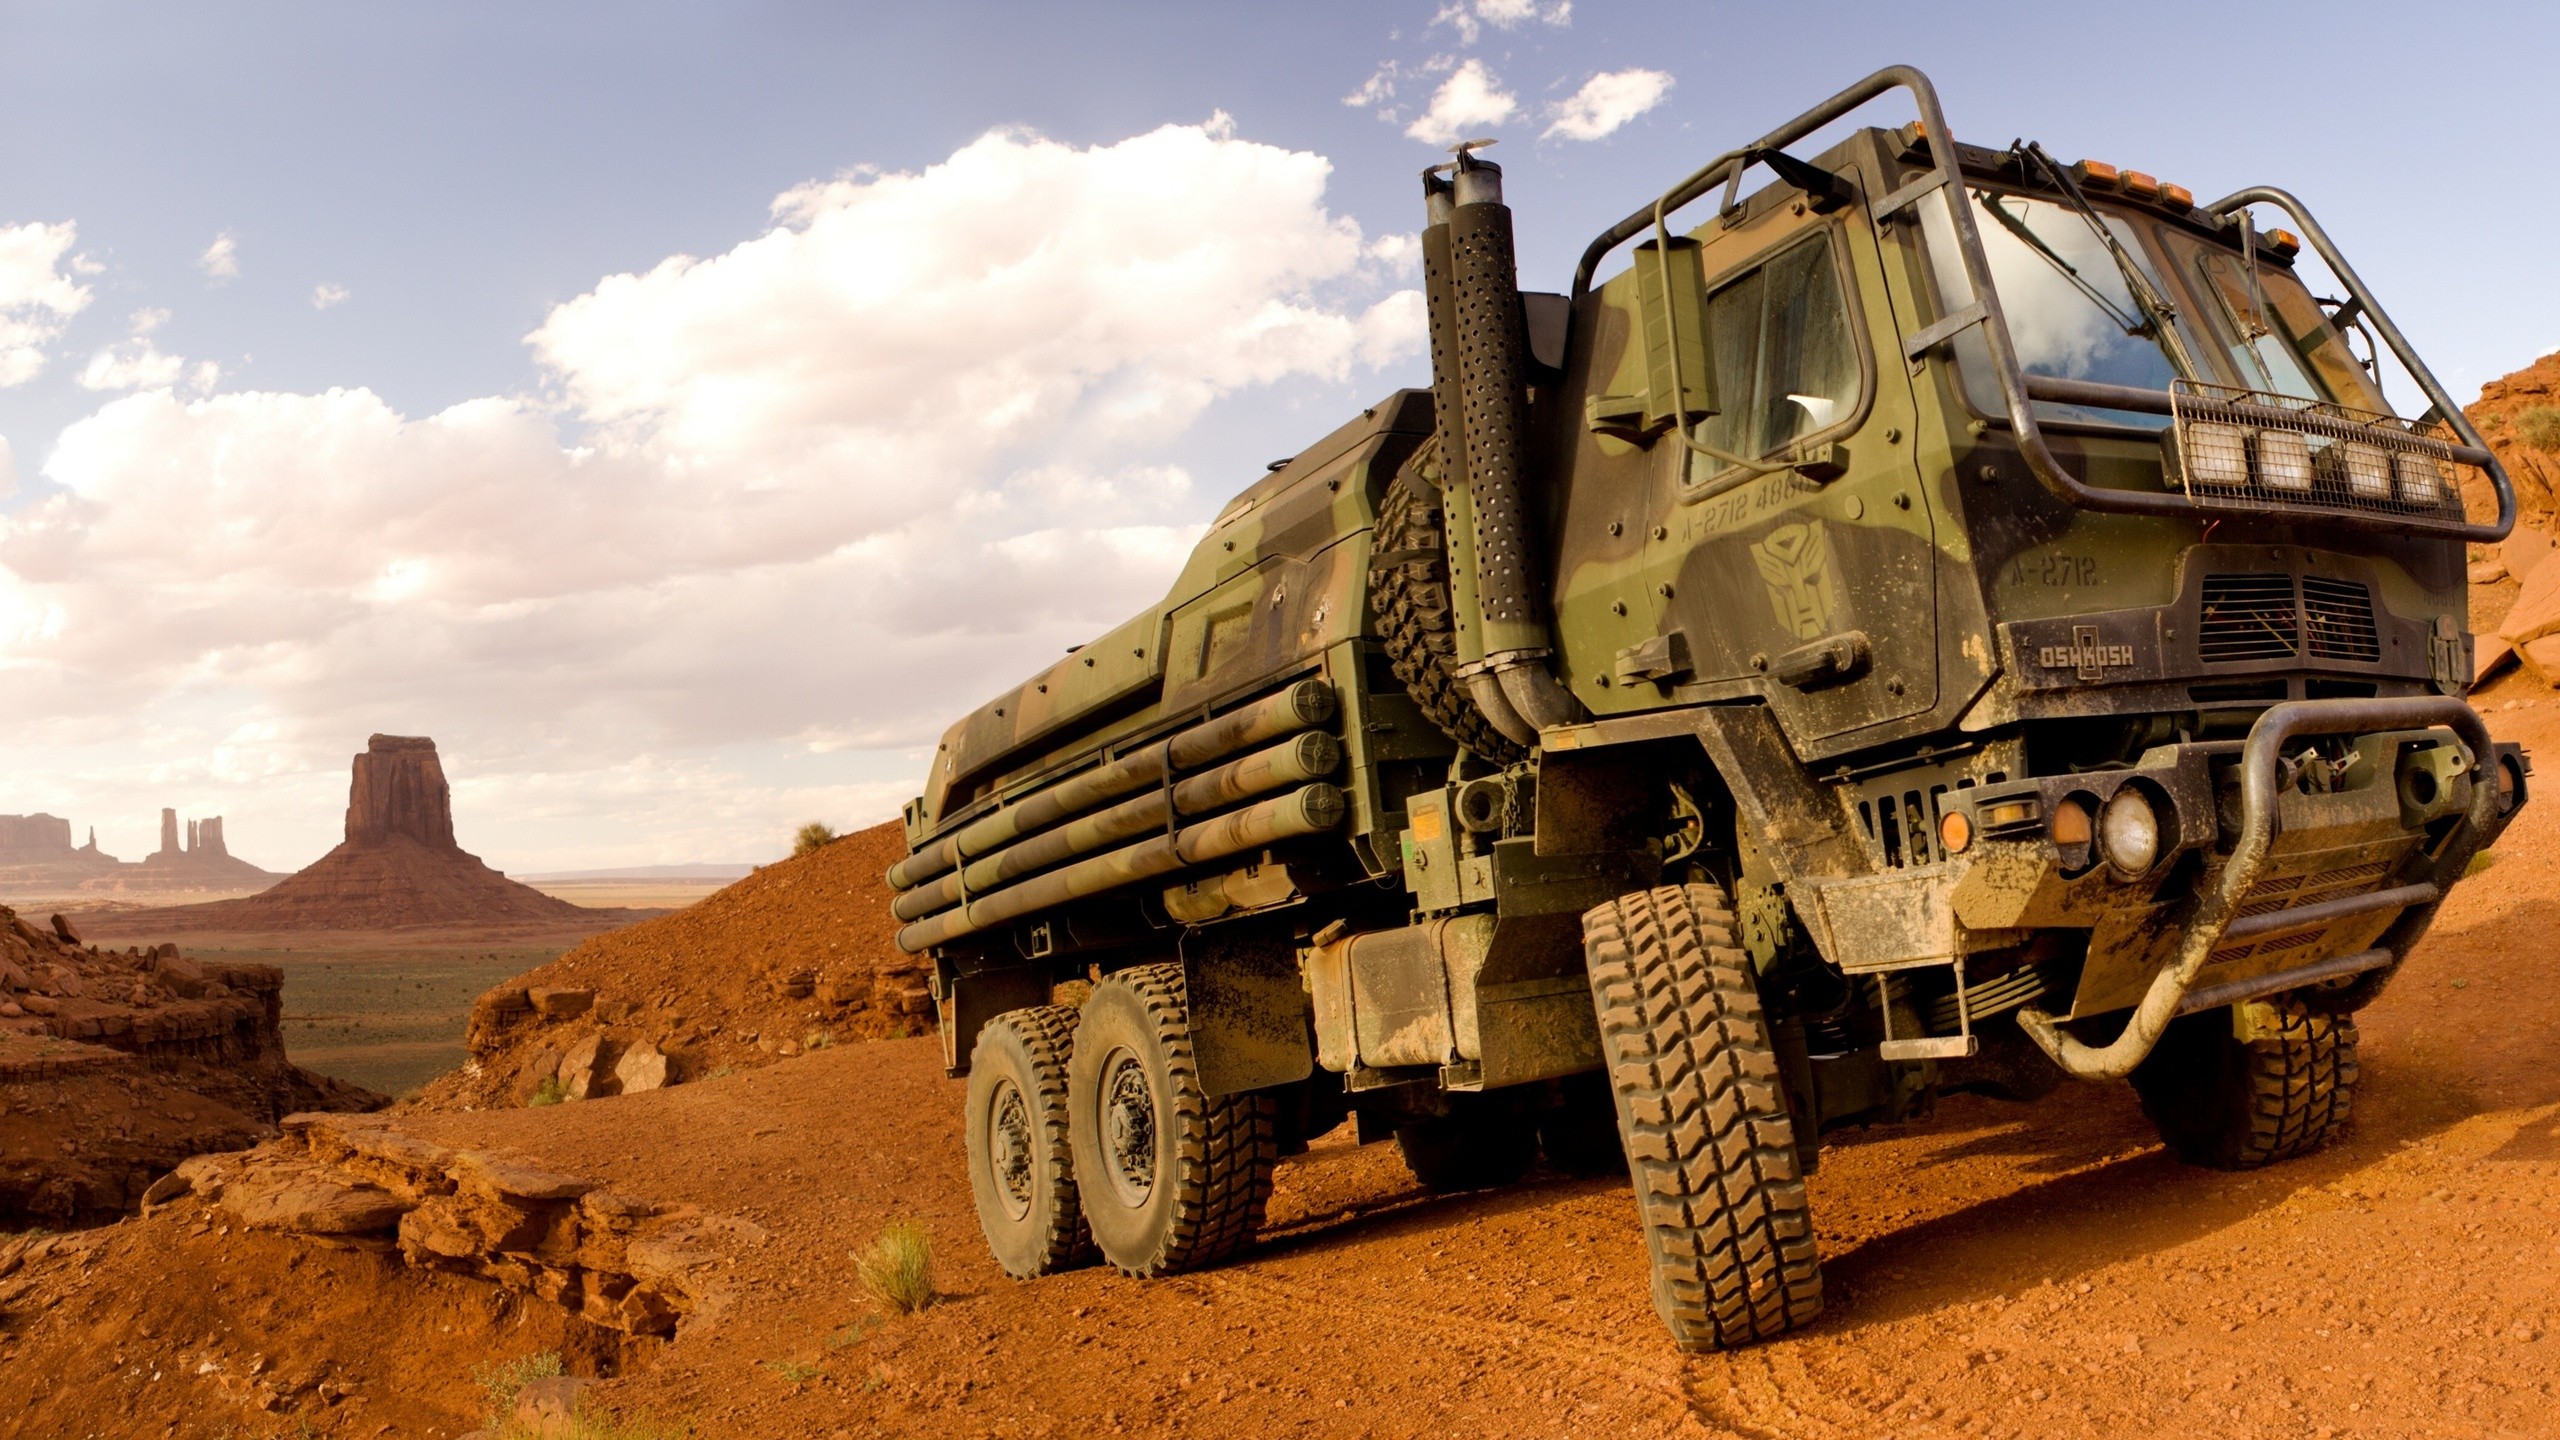 General 2560x1440 Transformers vehicle truck USA rocks outdoors Monument Valley Arizona